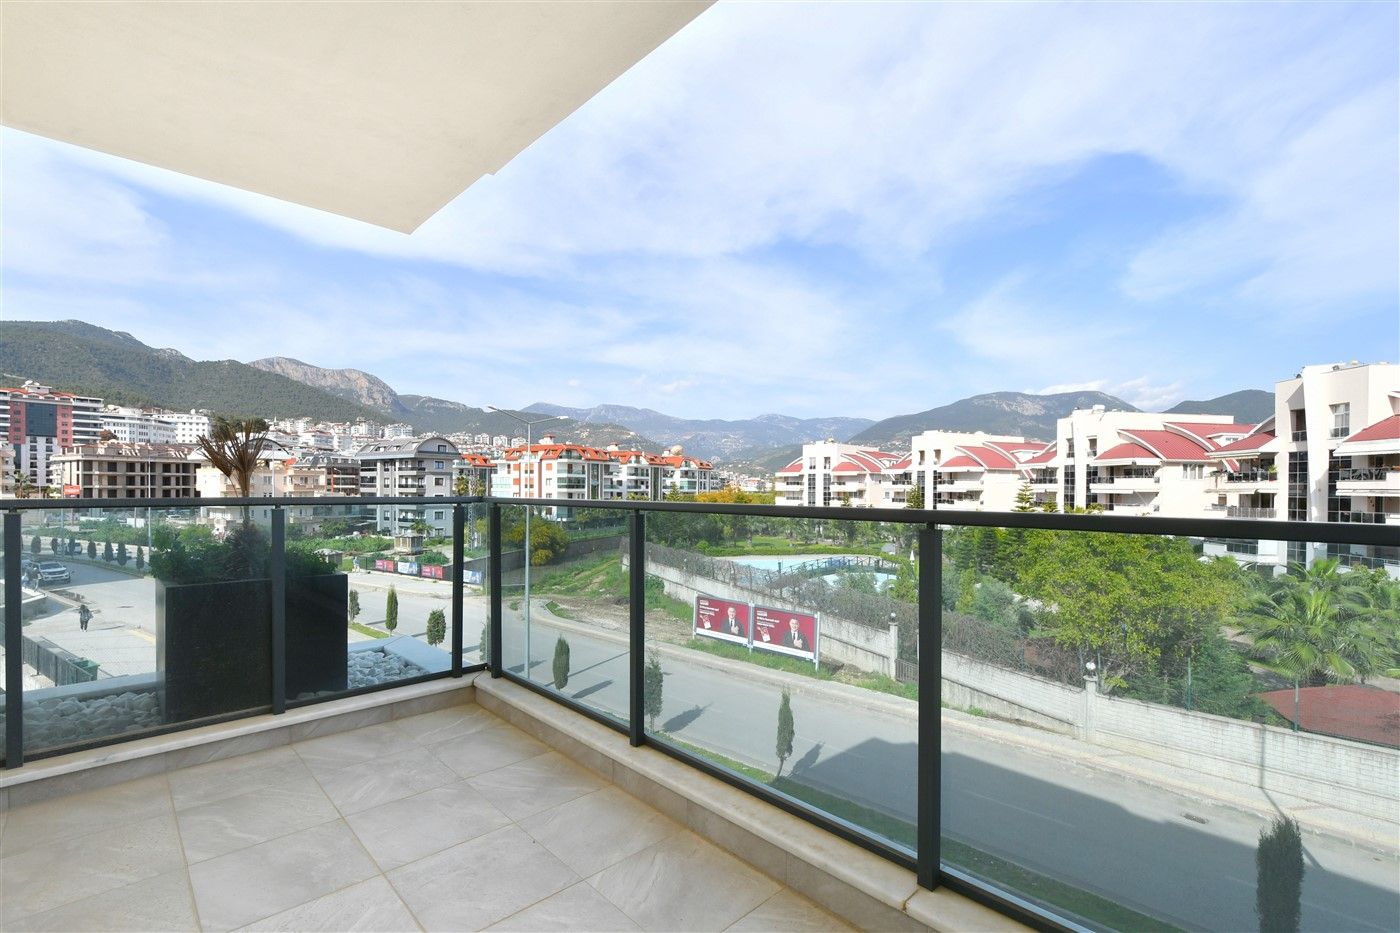 2 bedrooms apartment with floor heating system, new residential complex